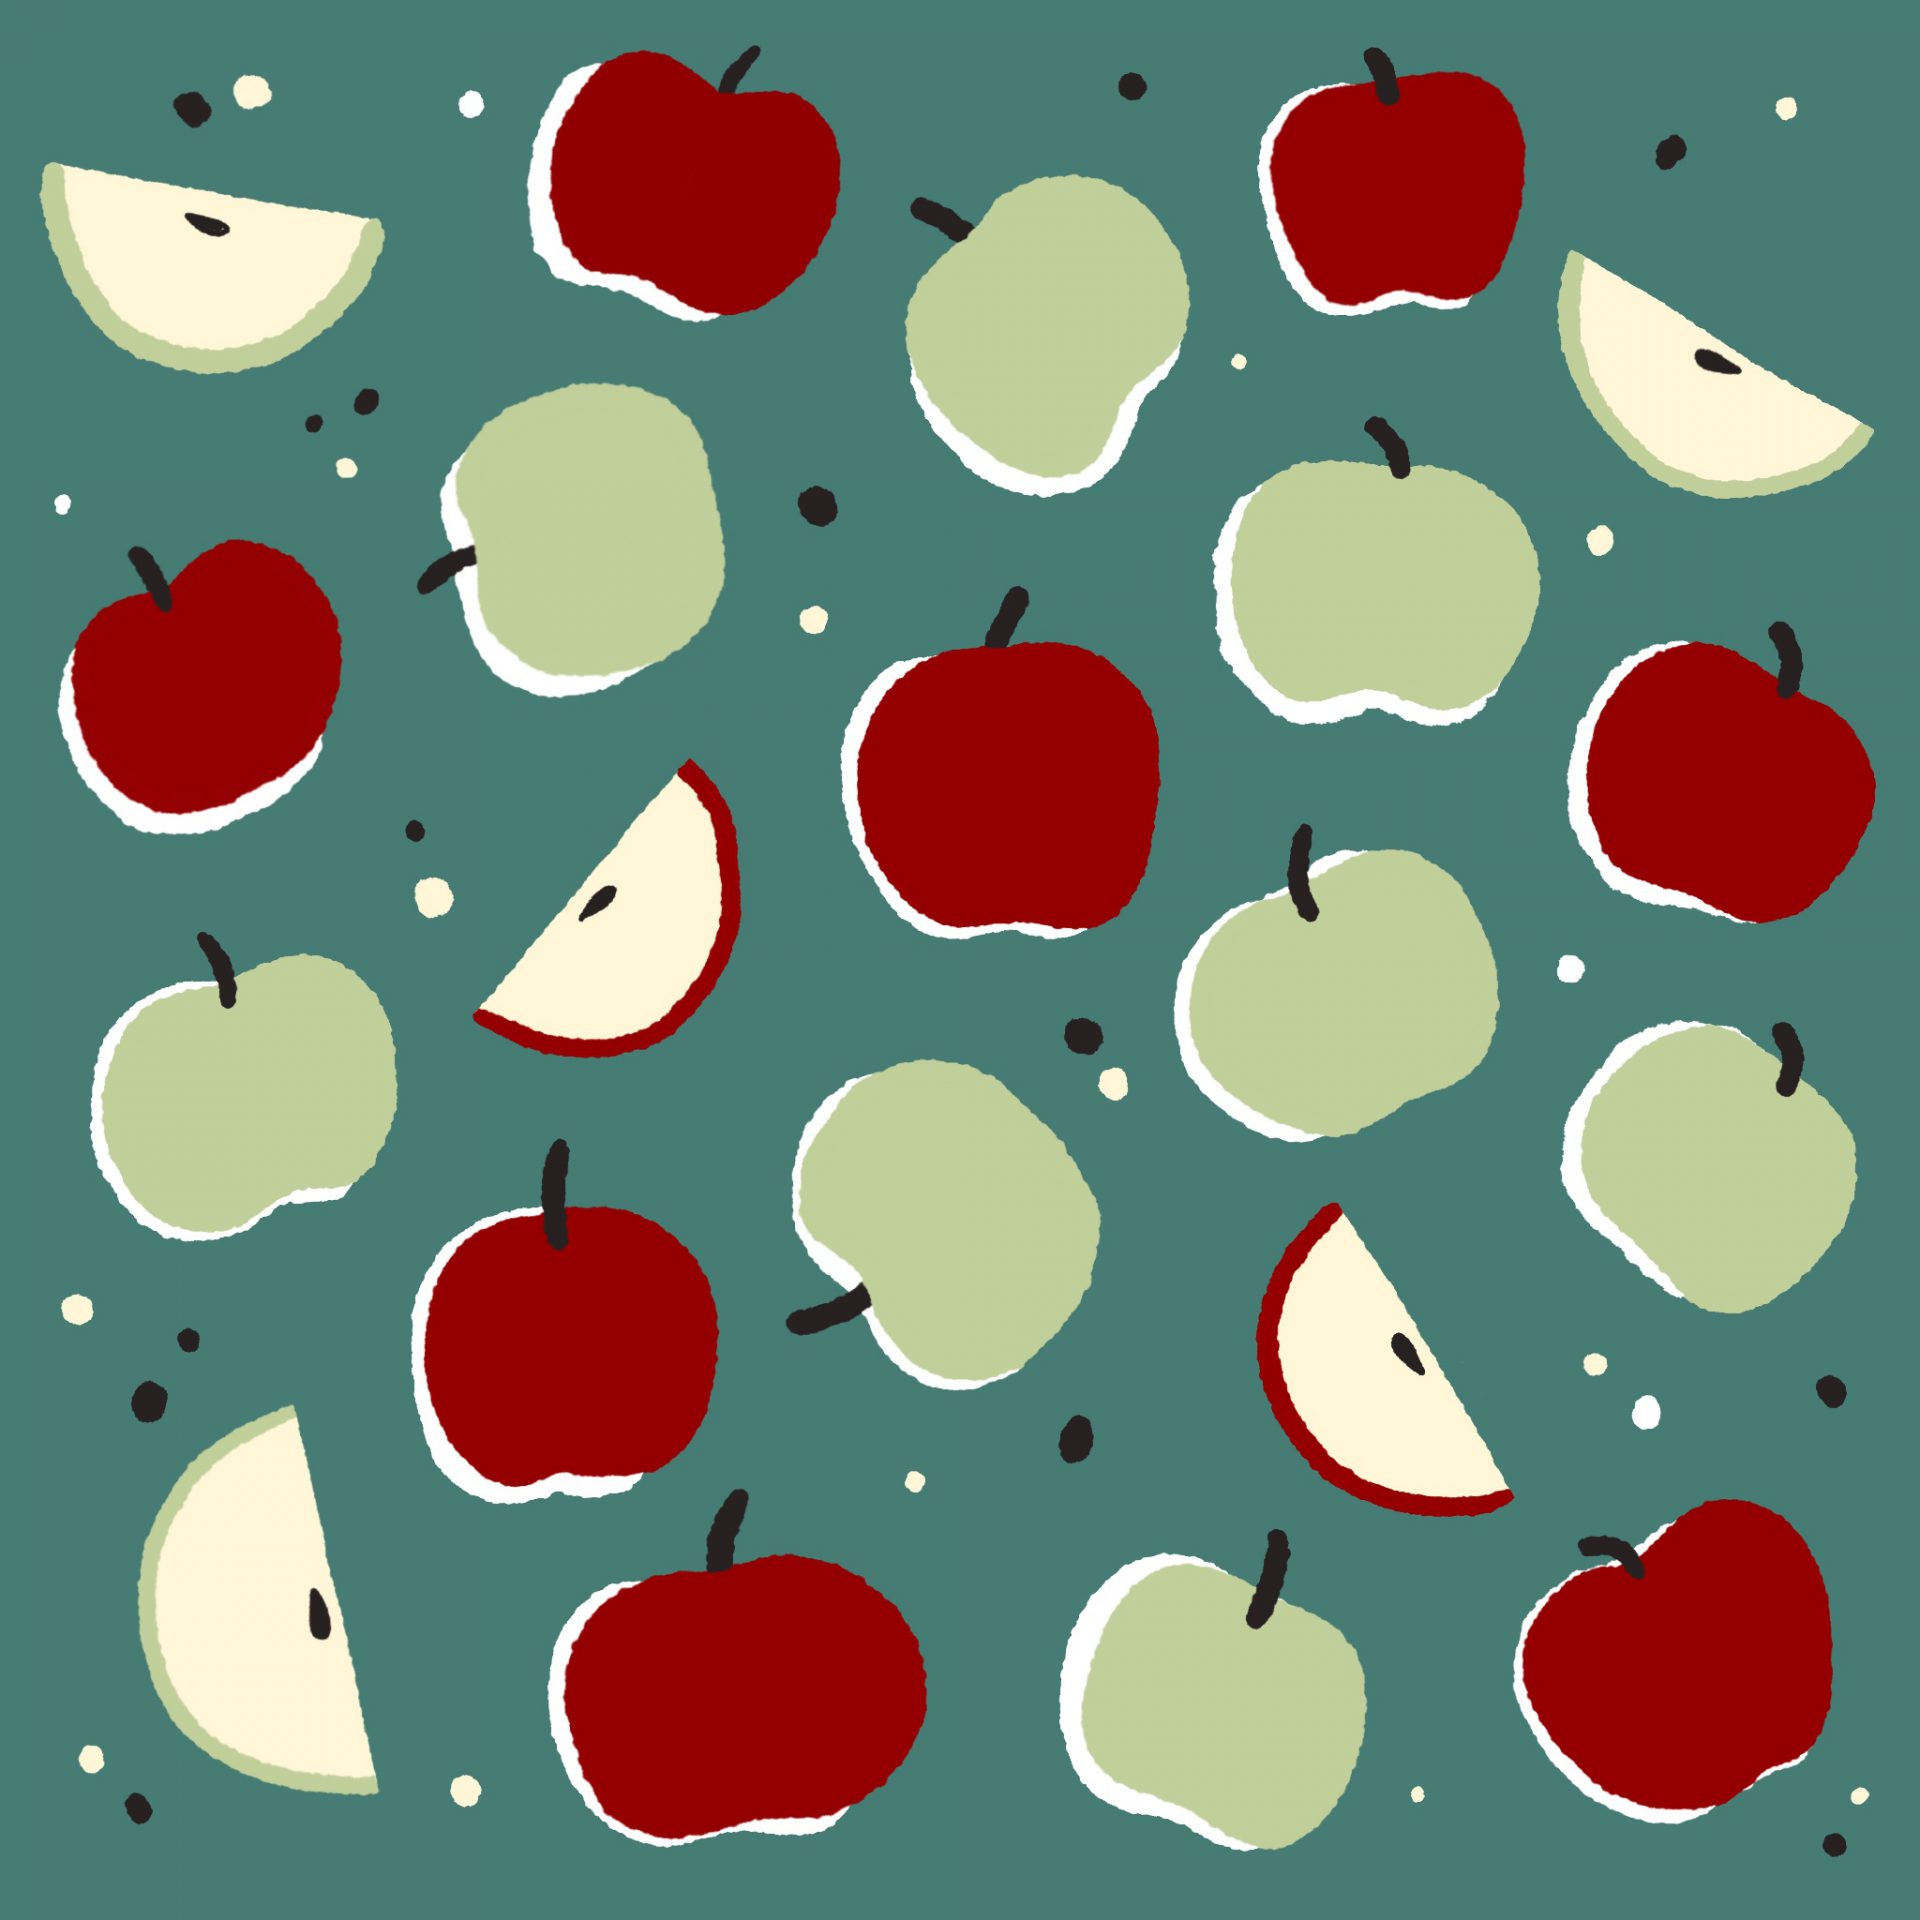 An illustrated pattern of apples